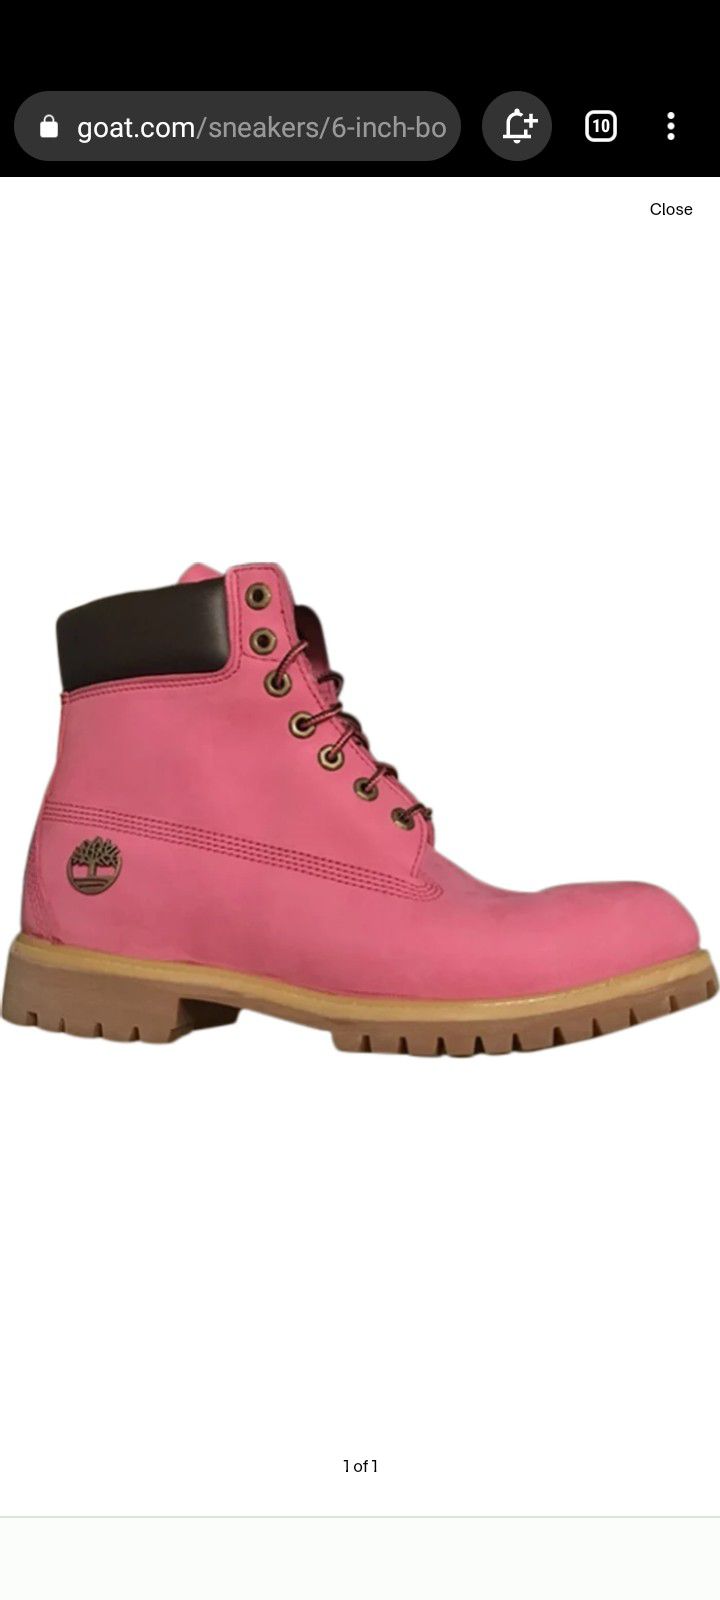 Pine Breast Cancer Timberland Boots